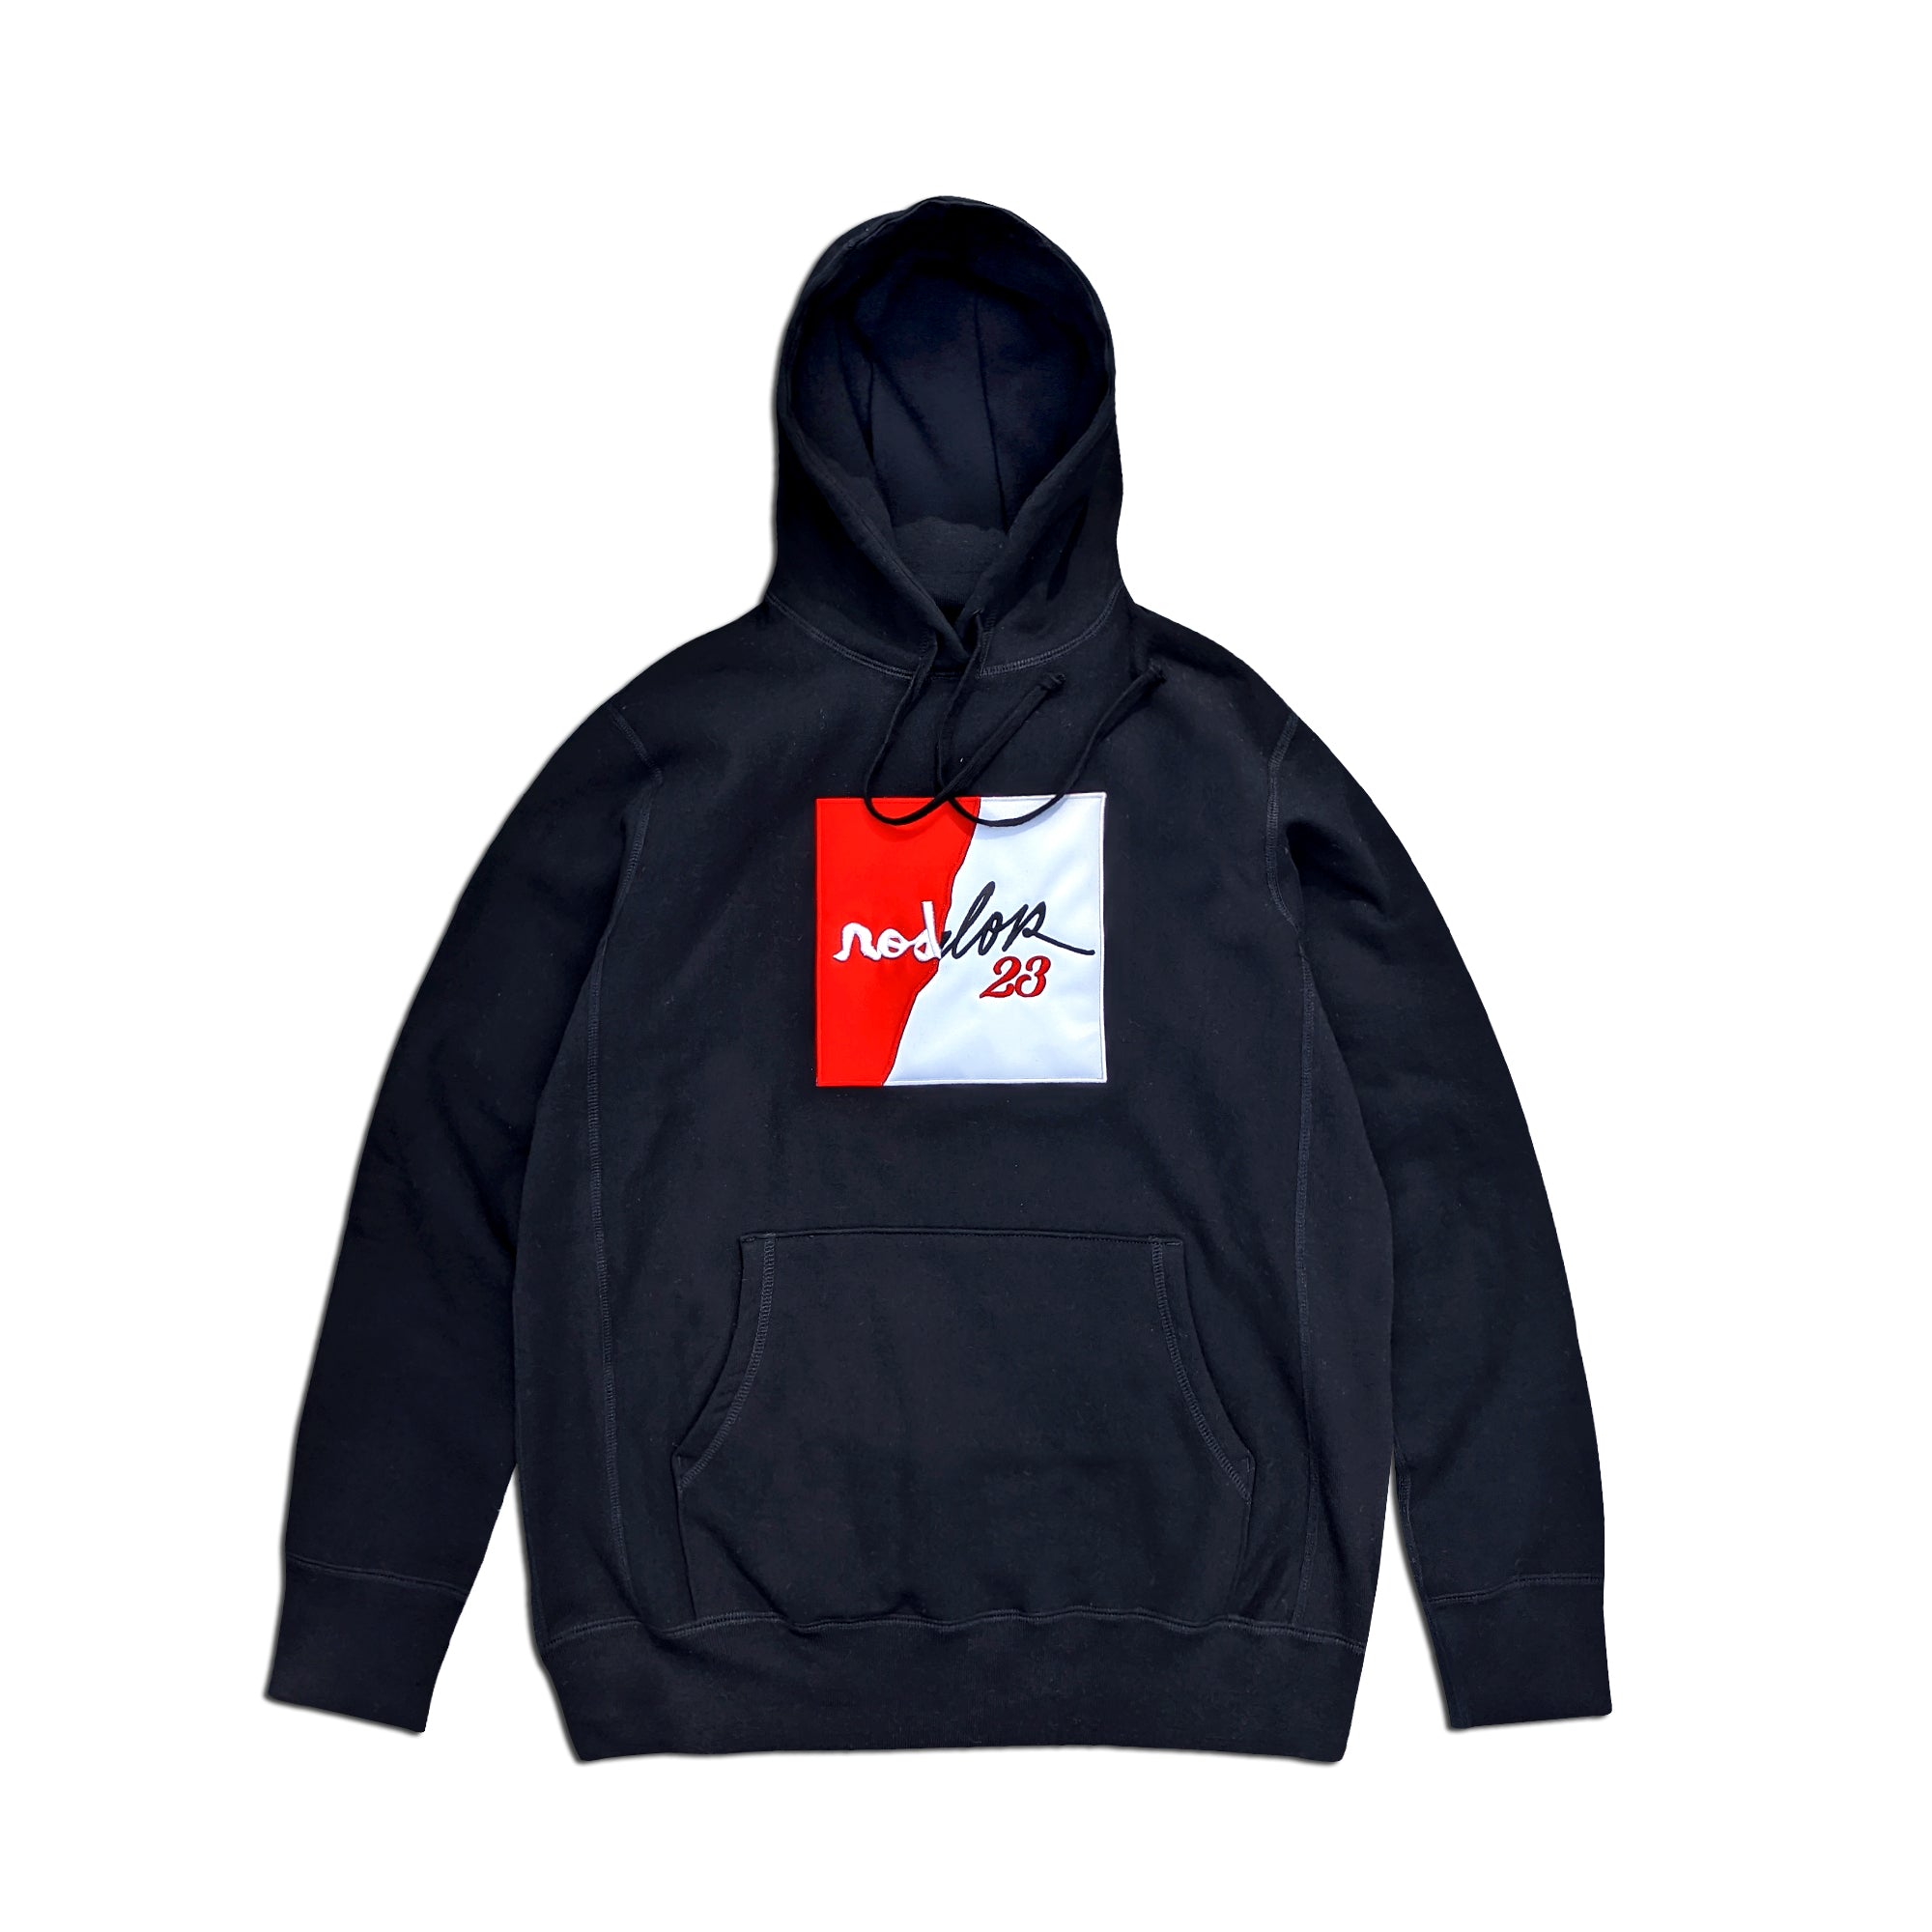 Parlor 23 X Rodney Made in Canada "RODLOR 23" Hoodie